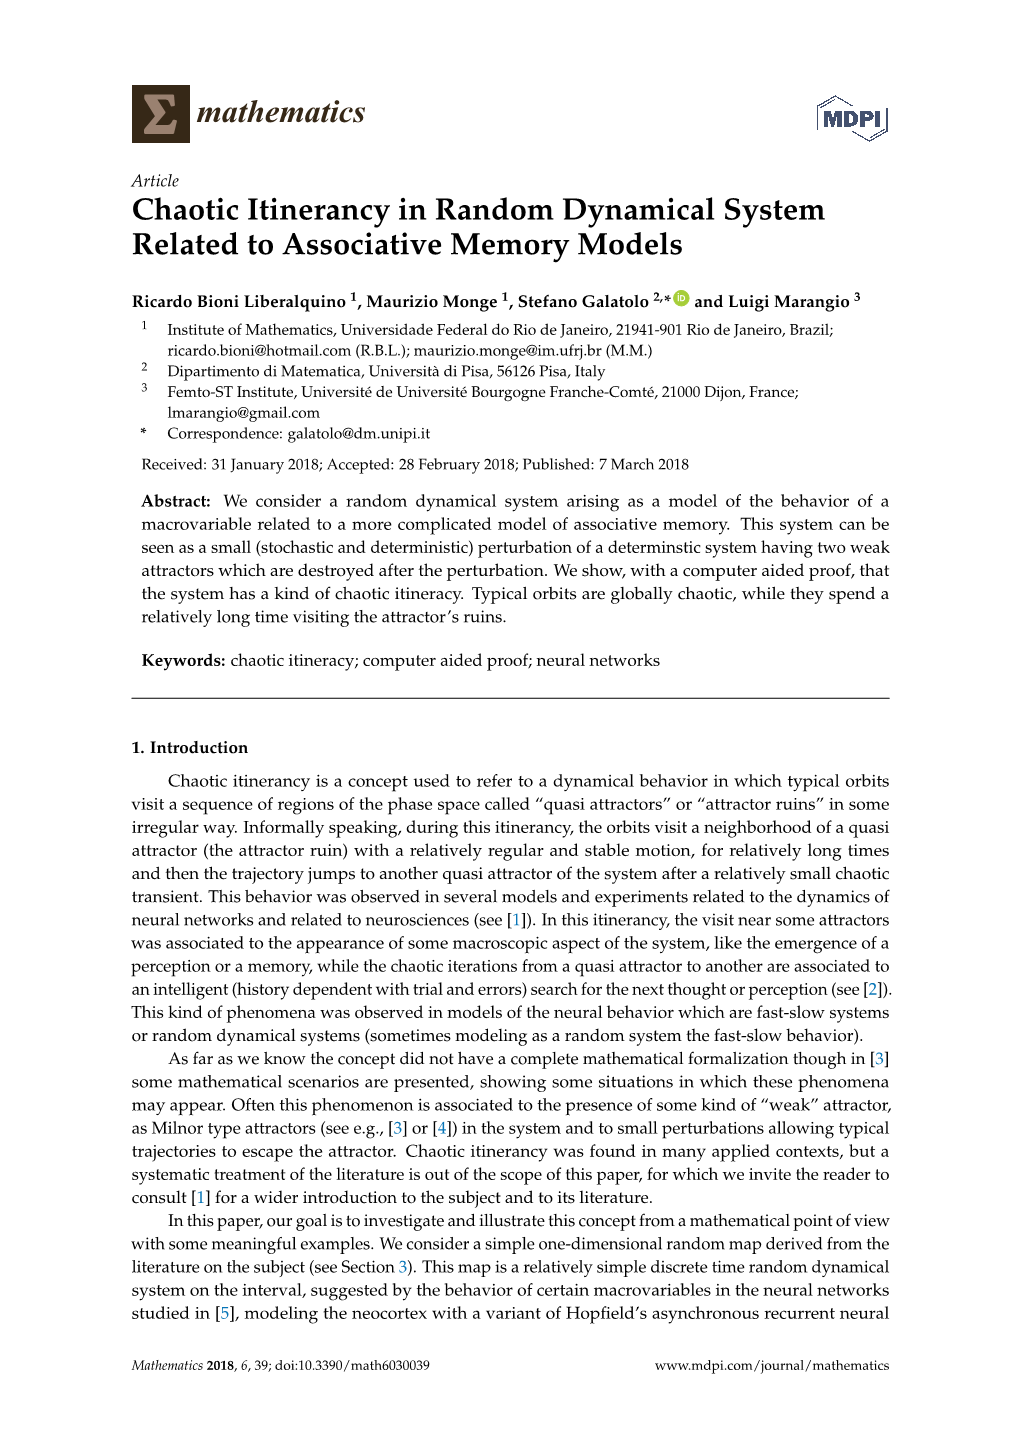 Chaotic Itinerancy in Random Dynamical System Related to Associative Memory Models